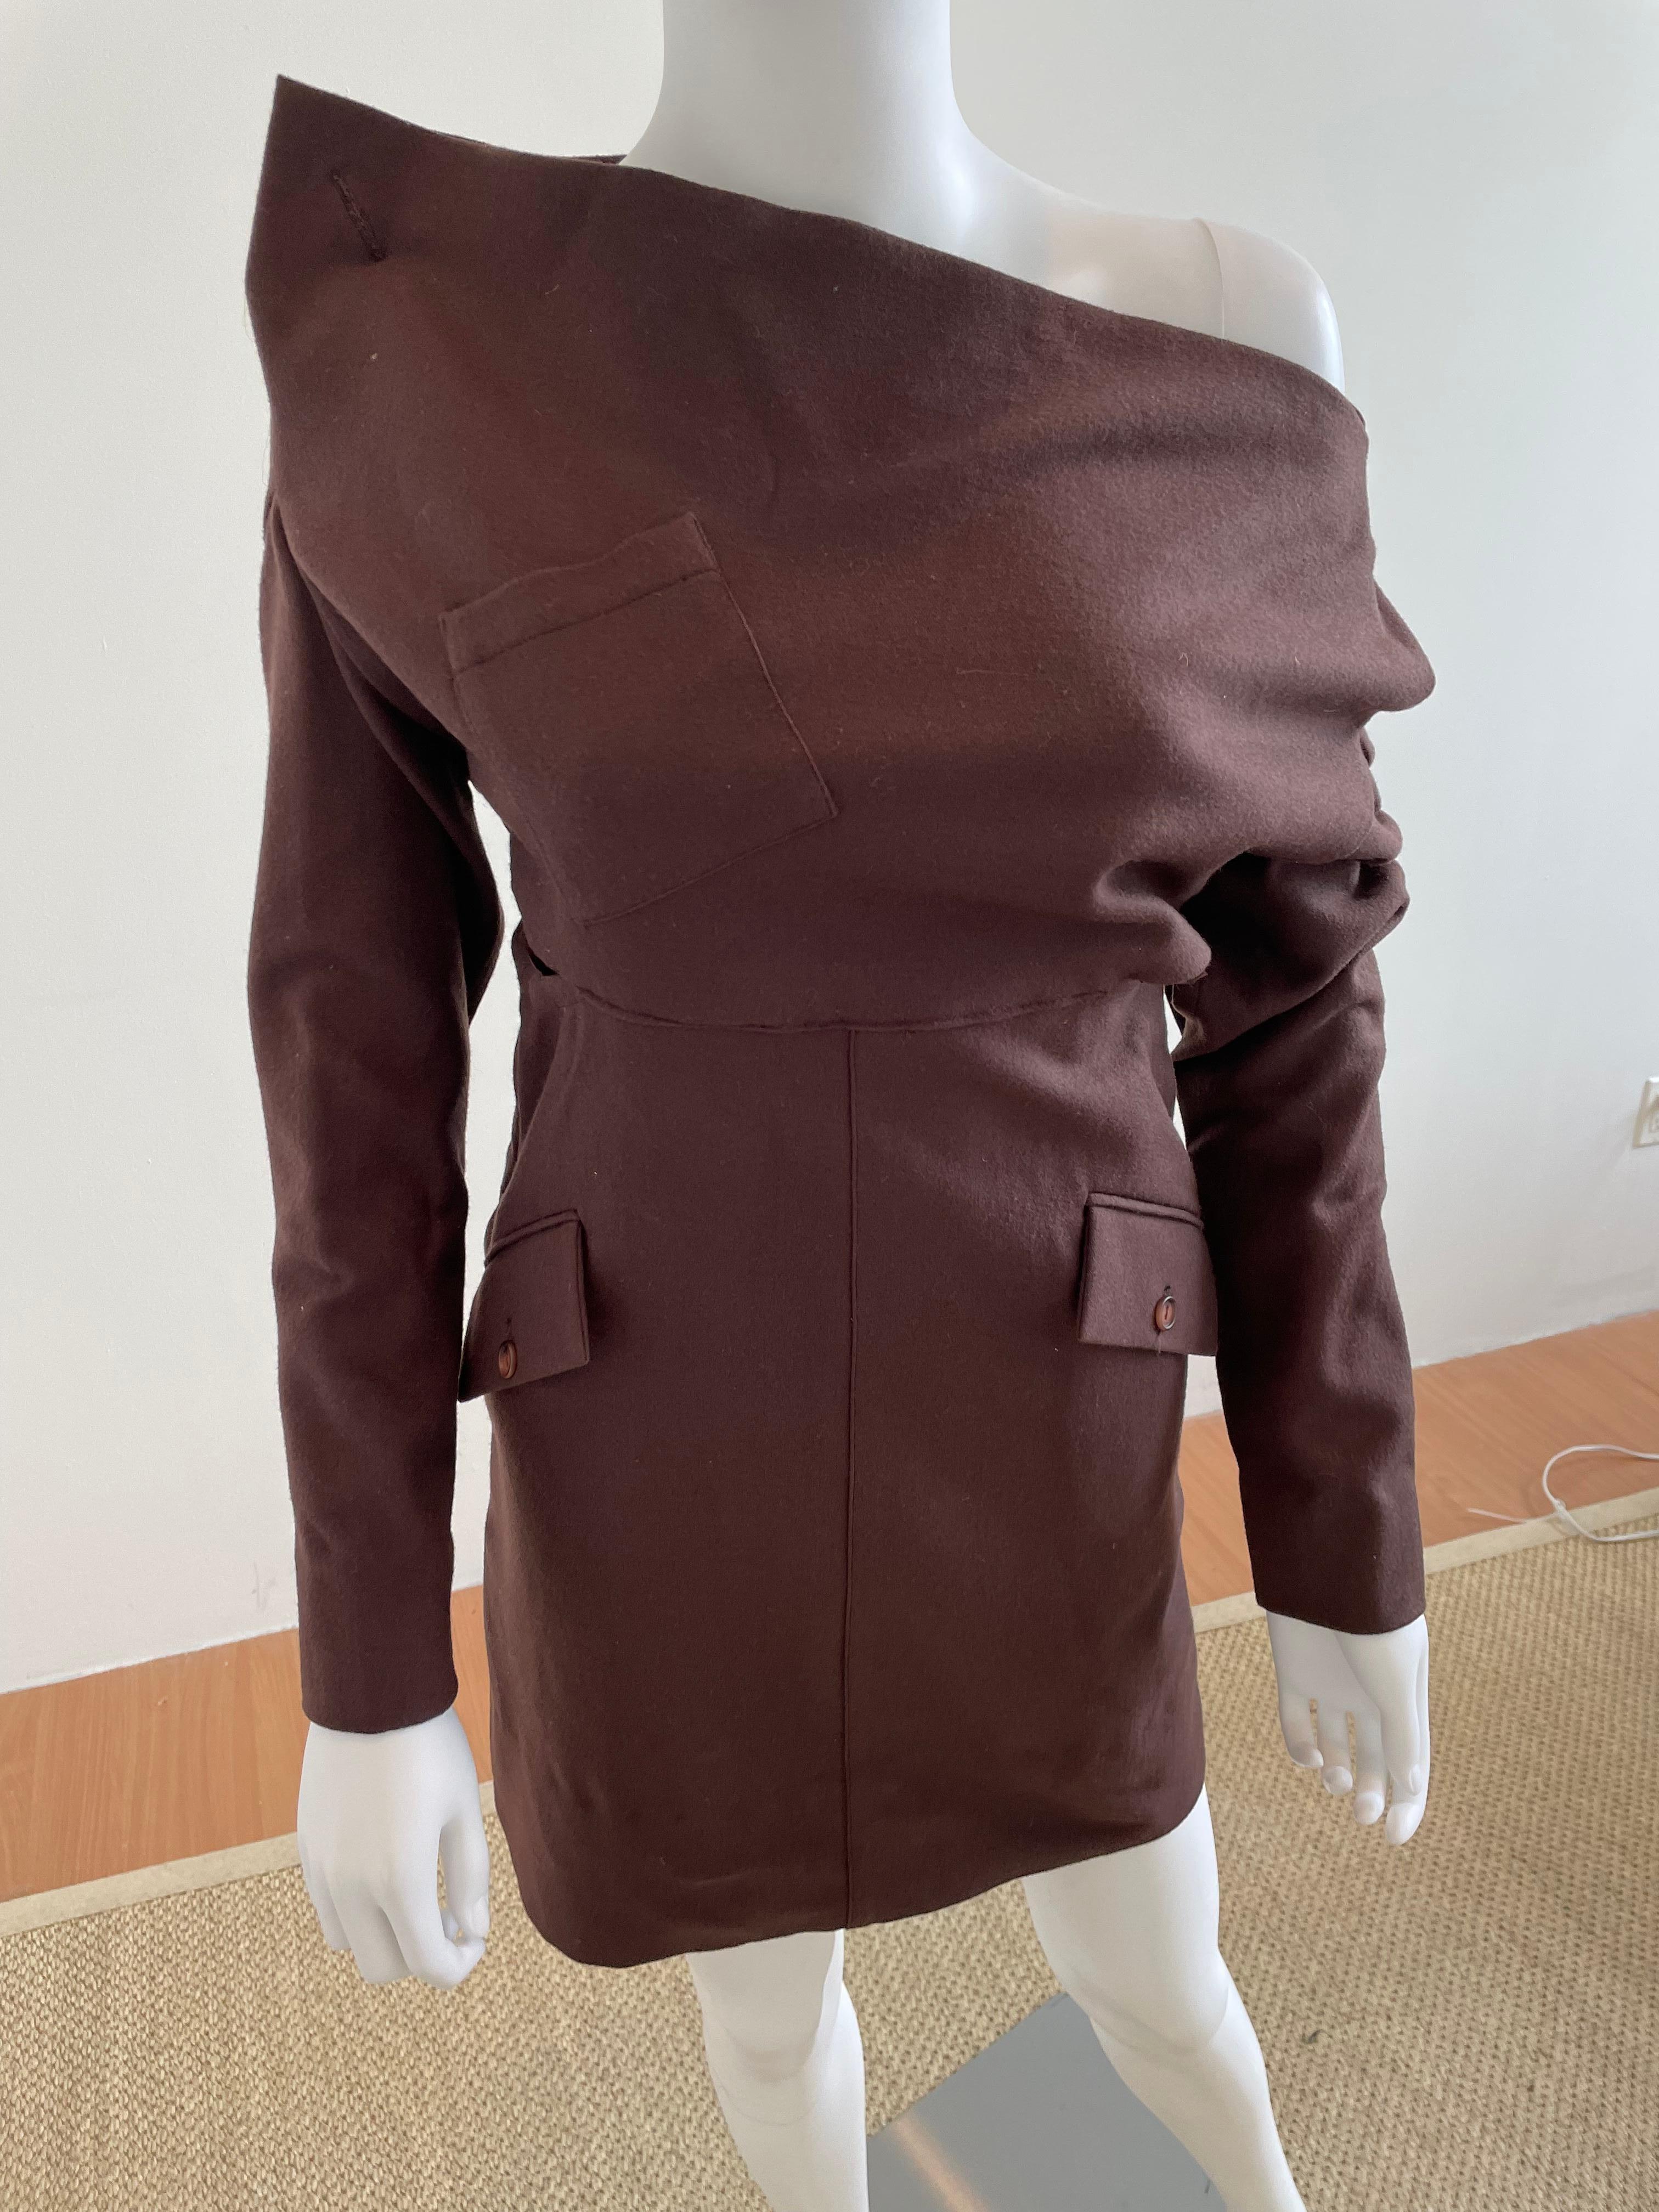 Vintage off shoulder Costume National brown Lana wool mini dress with pockets and a side cut out. Made in Italy. Size Small. Please inquire if you have any questions! Please be mindful that this piece has led a previous life, and may tell its story